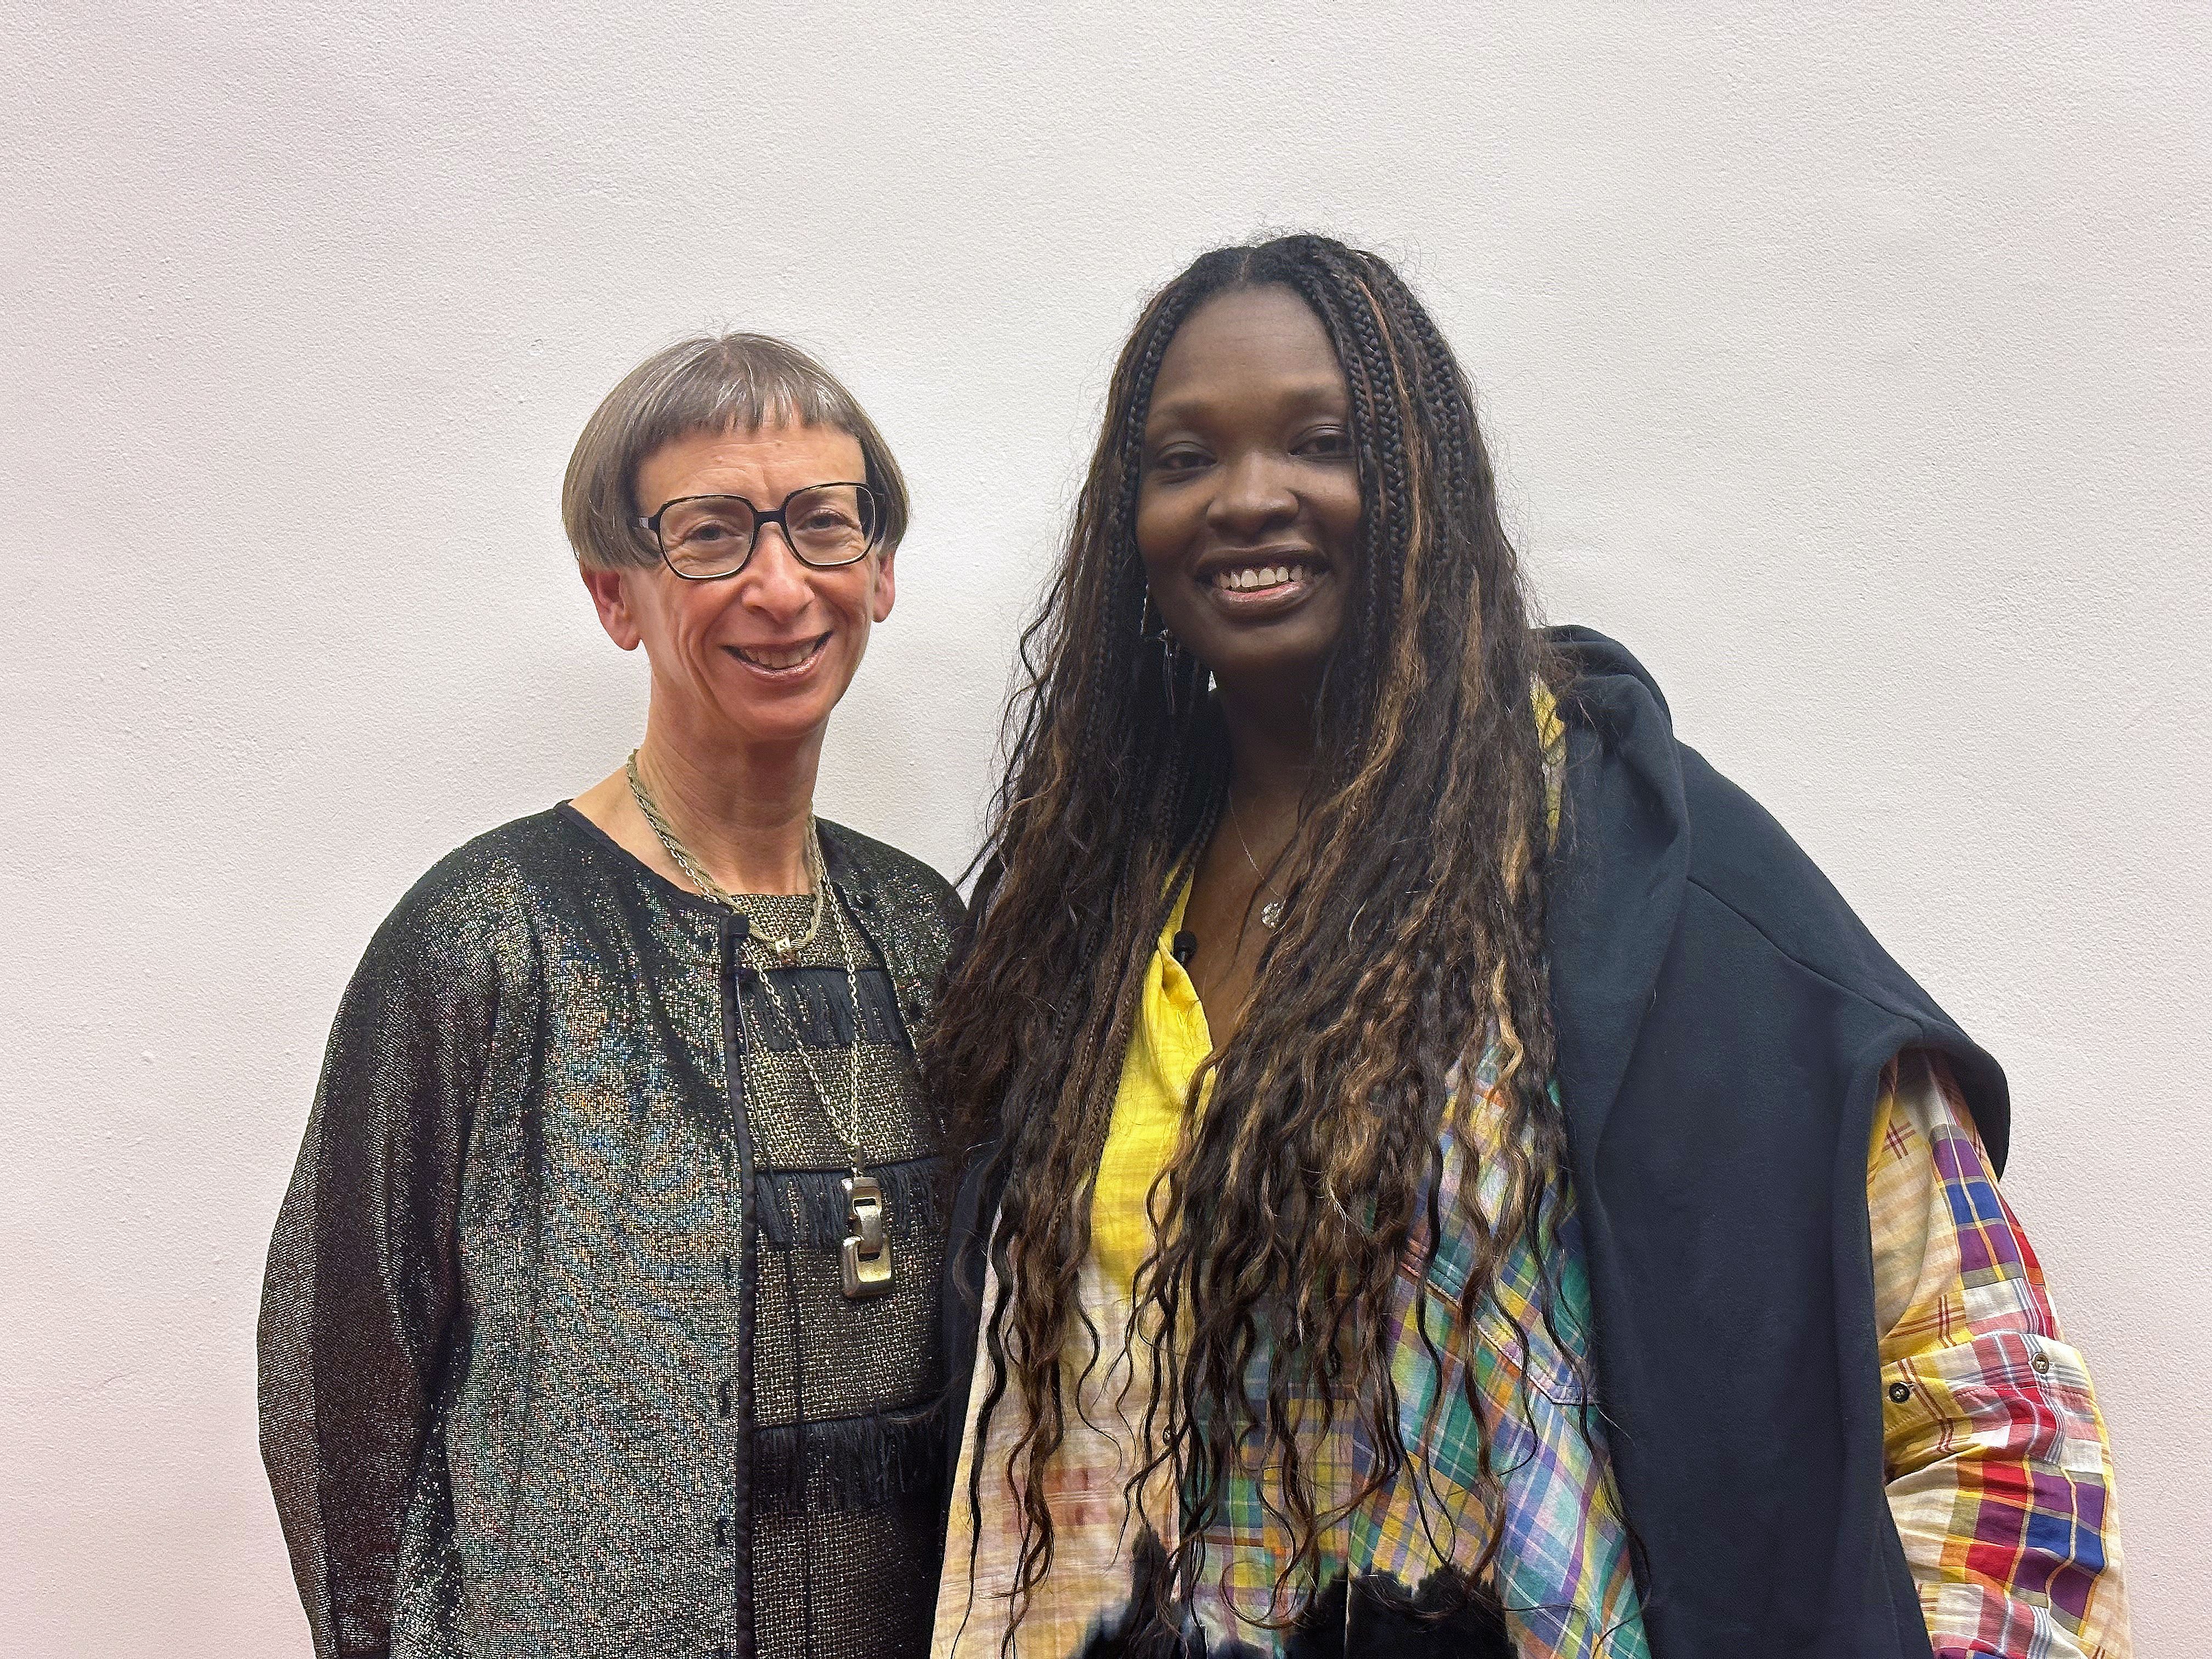 Left - right, LCF’s Professor Reina Lewis talks to PC Williams, stylist and creative consultant at Faith and Fashion in conversation, November 2022.